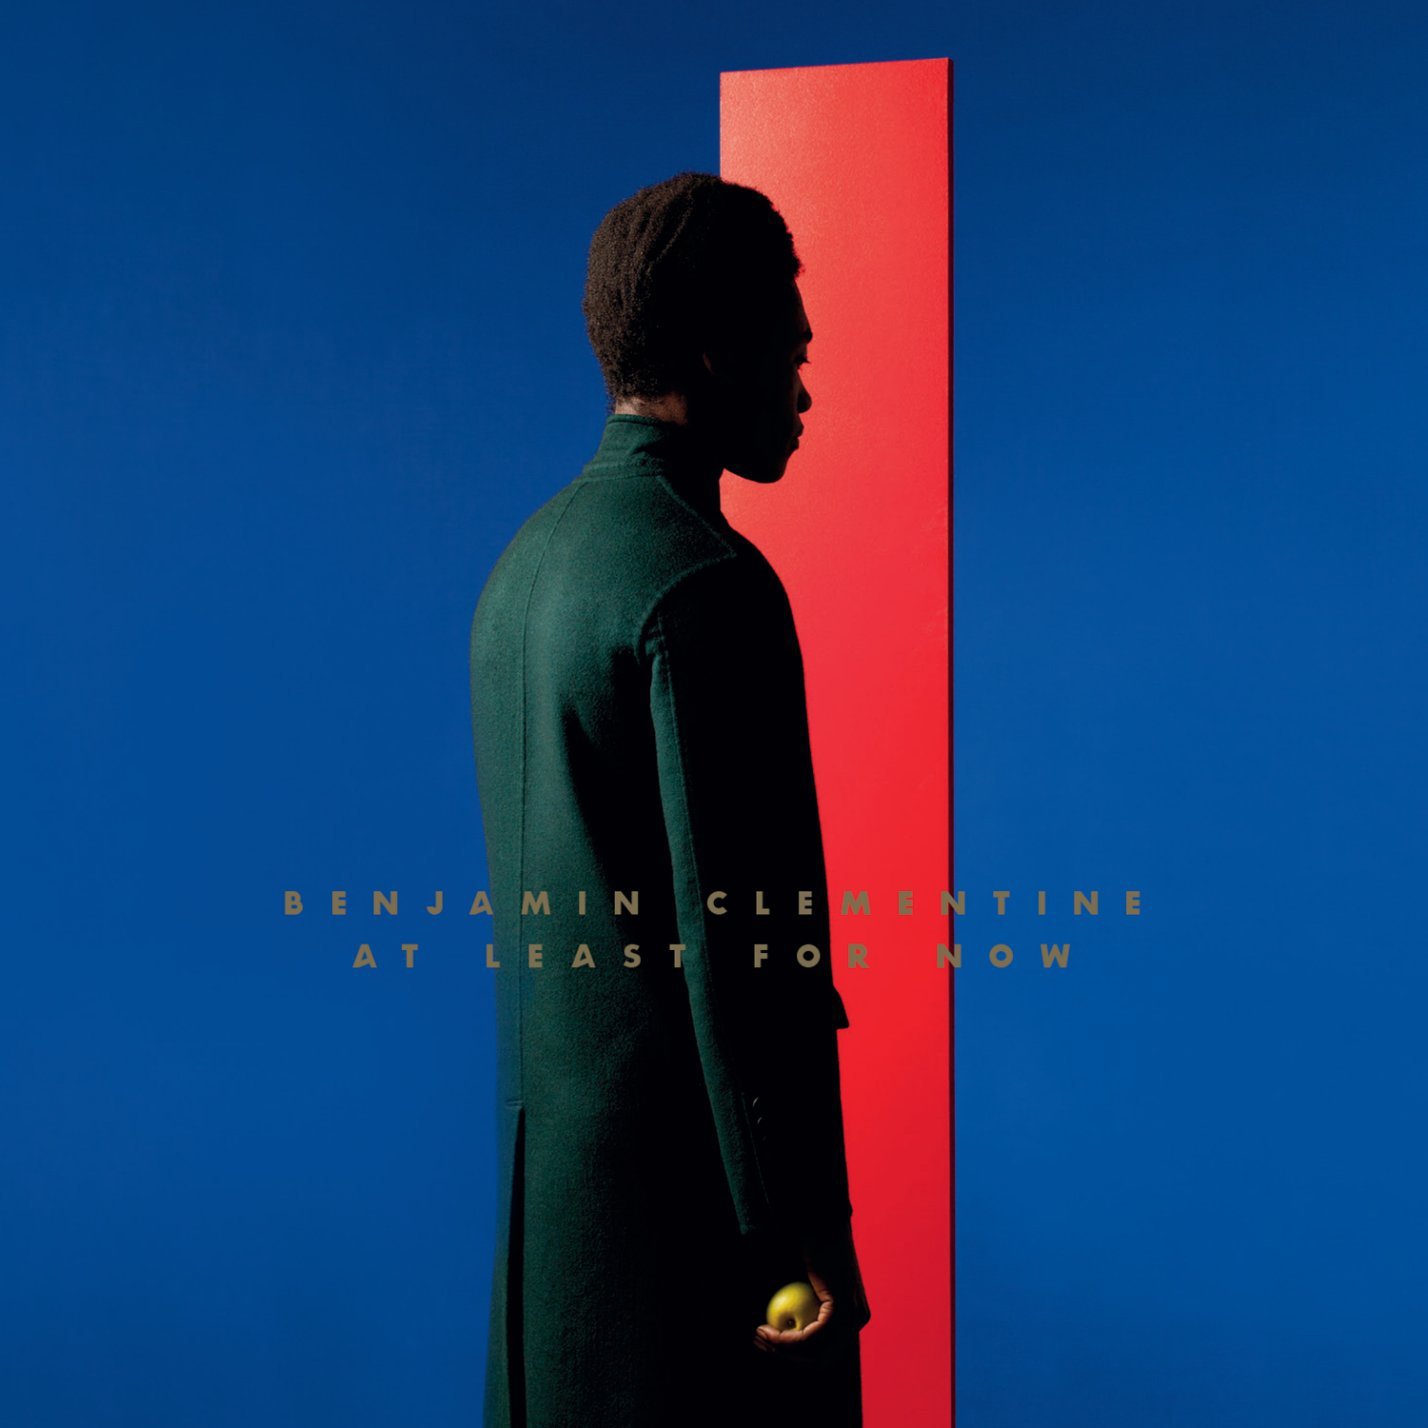 Benjamin Clementine – At Least For Now (2015) [HDTracks FLAC 24bit/44,1kHz]